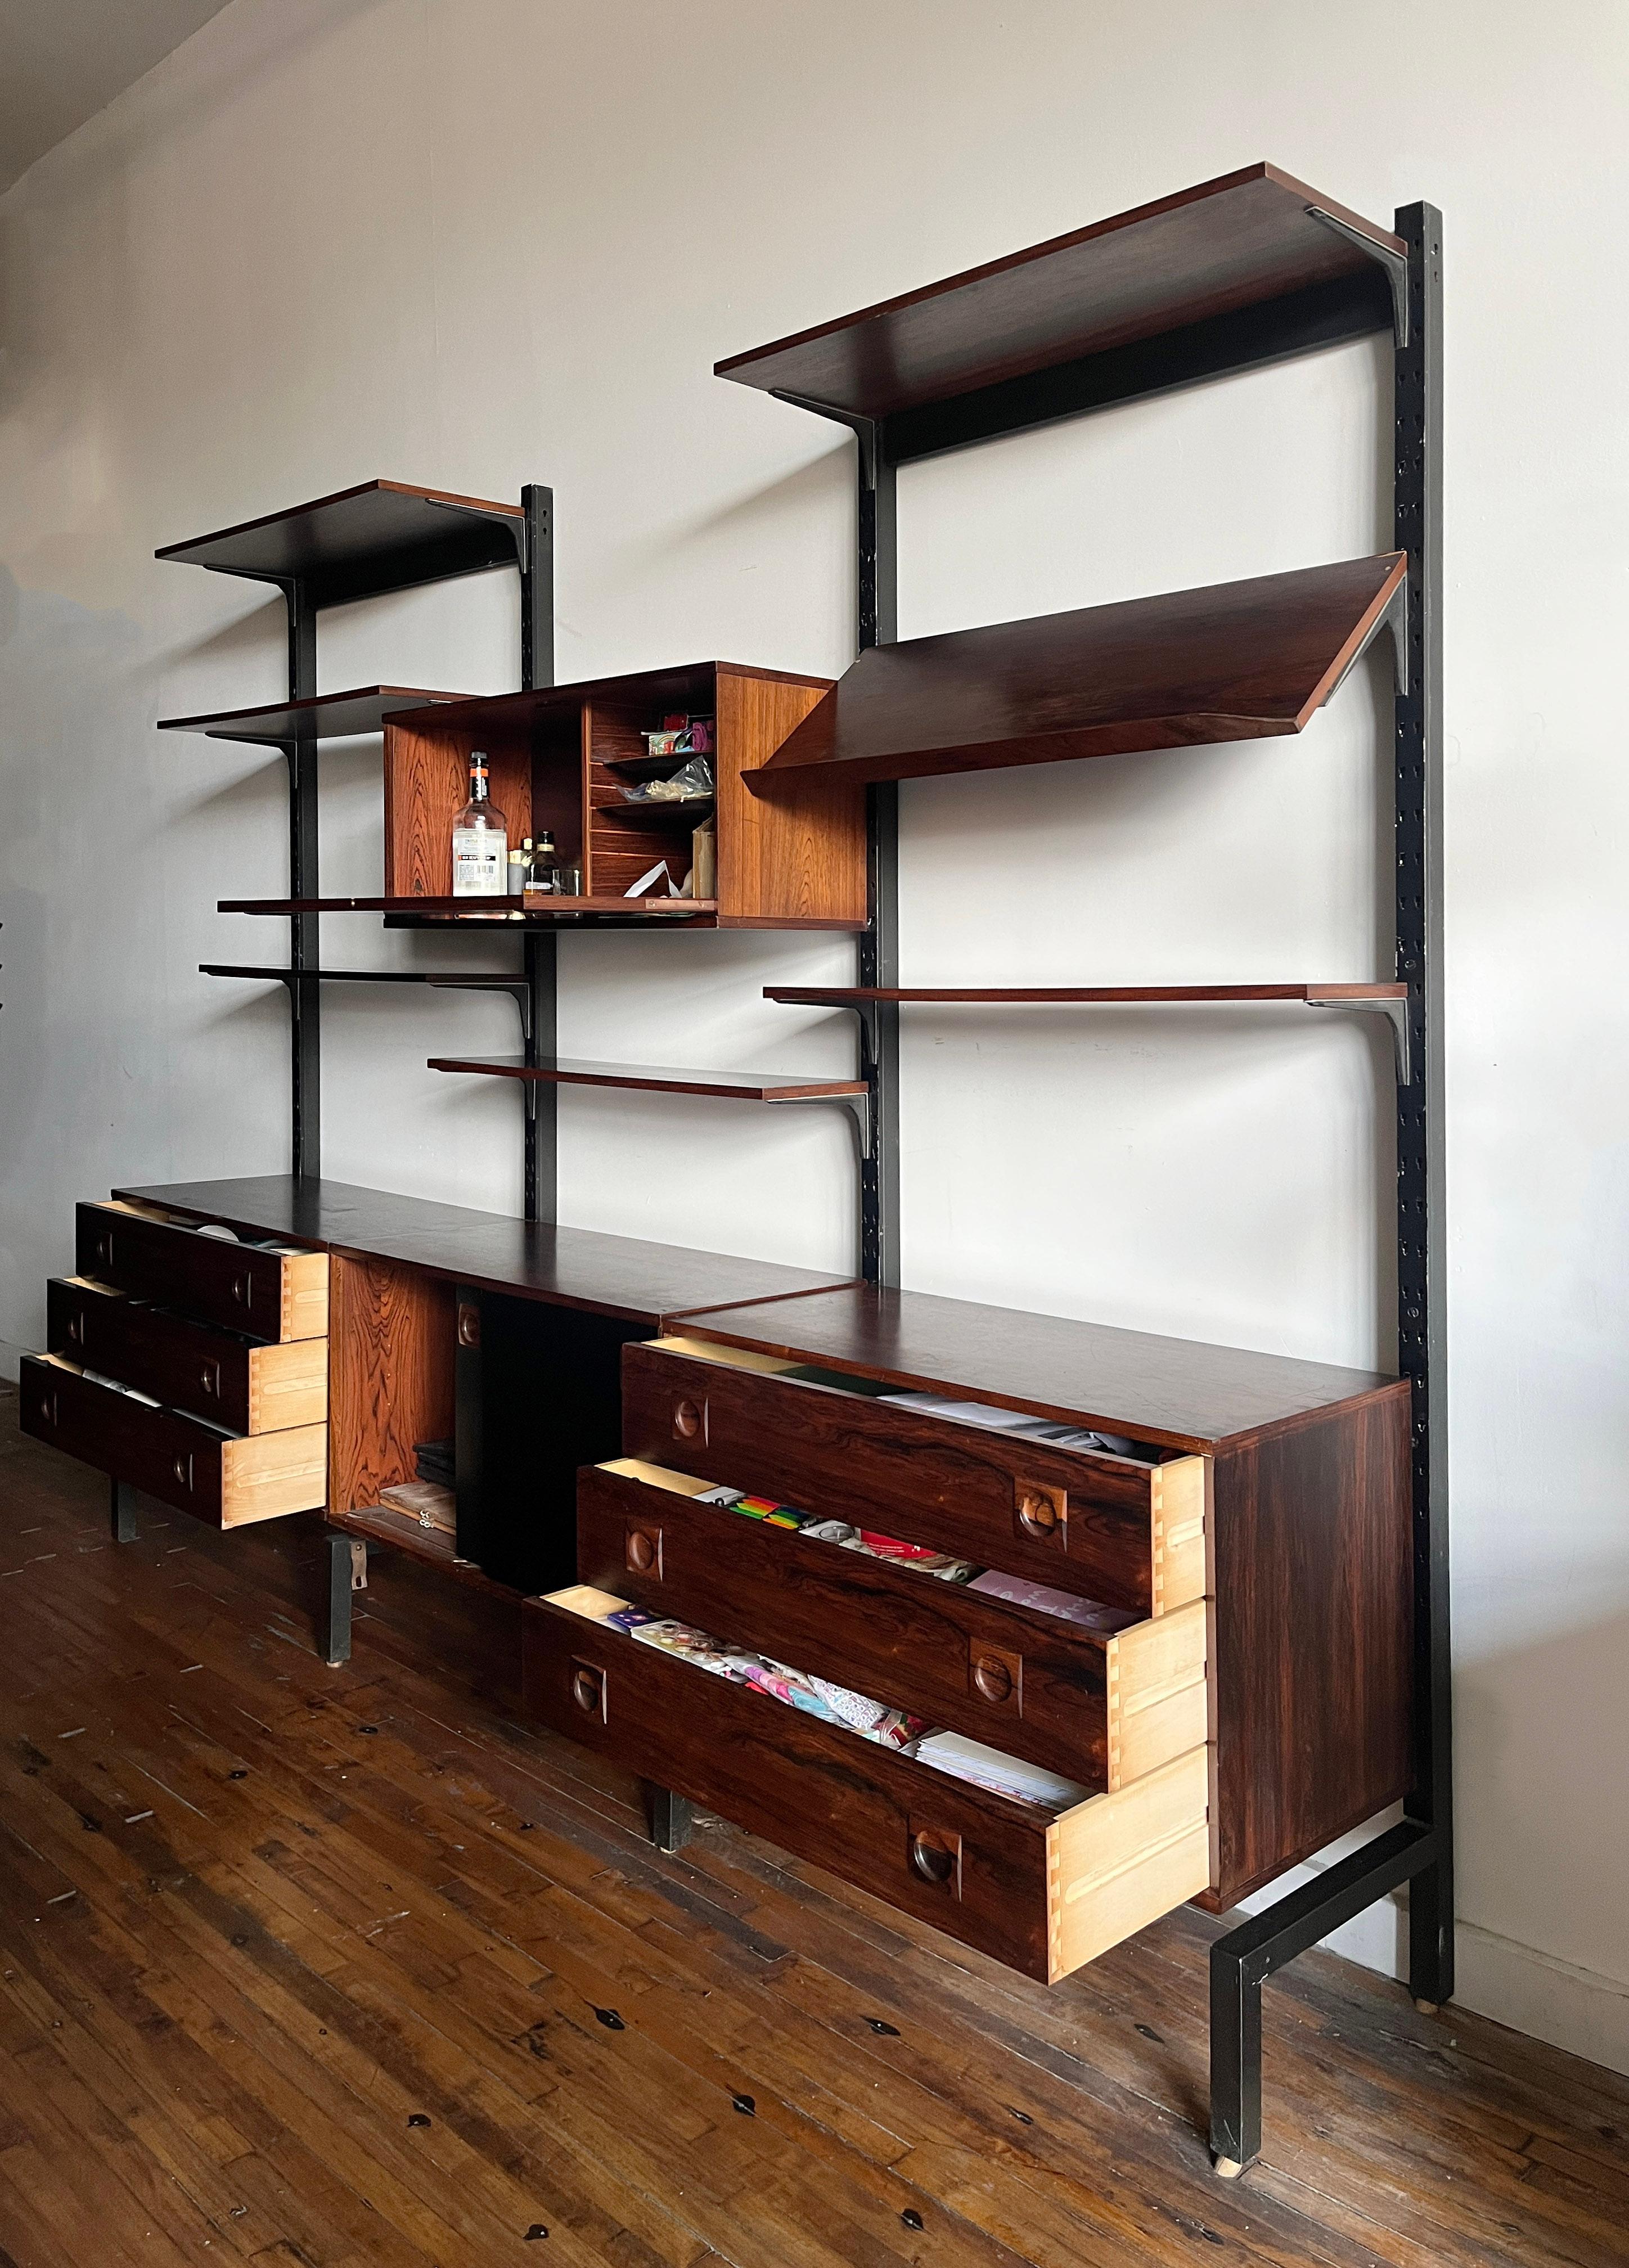 This is one beautiful Brazilian rosewood Danish shelving modular system by Albert Hansen 1980s (Signed). This unit includes 7 shelves, 1 slanted book display, 1 drop down door dry bar, 1 double door sliding cabinet, 2 cabinets with three drawers